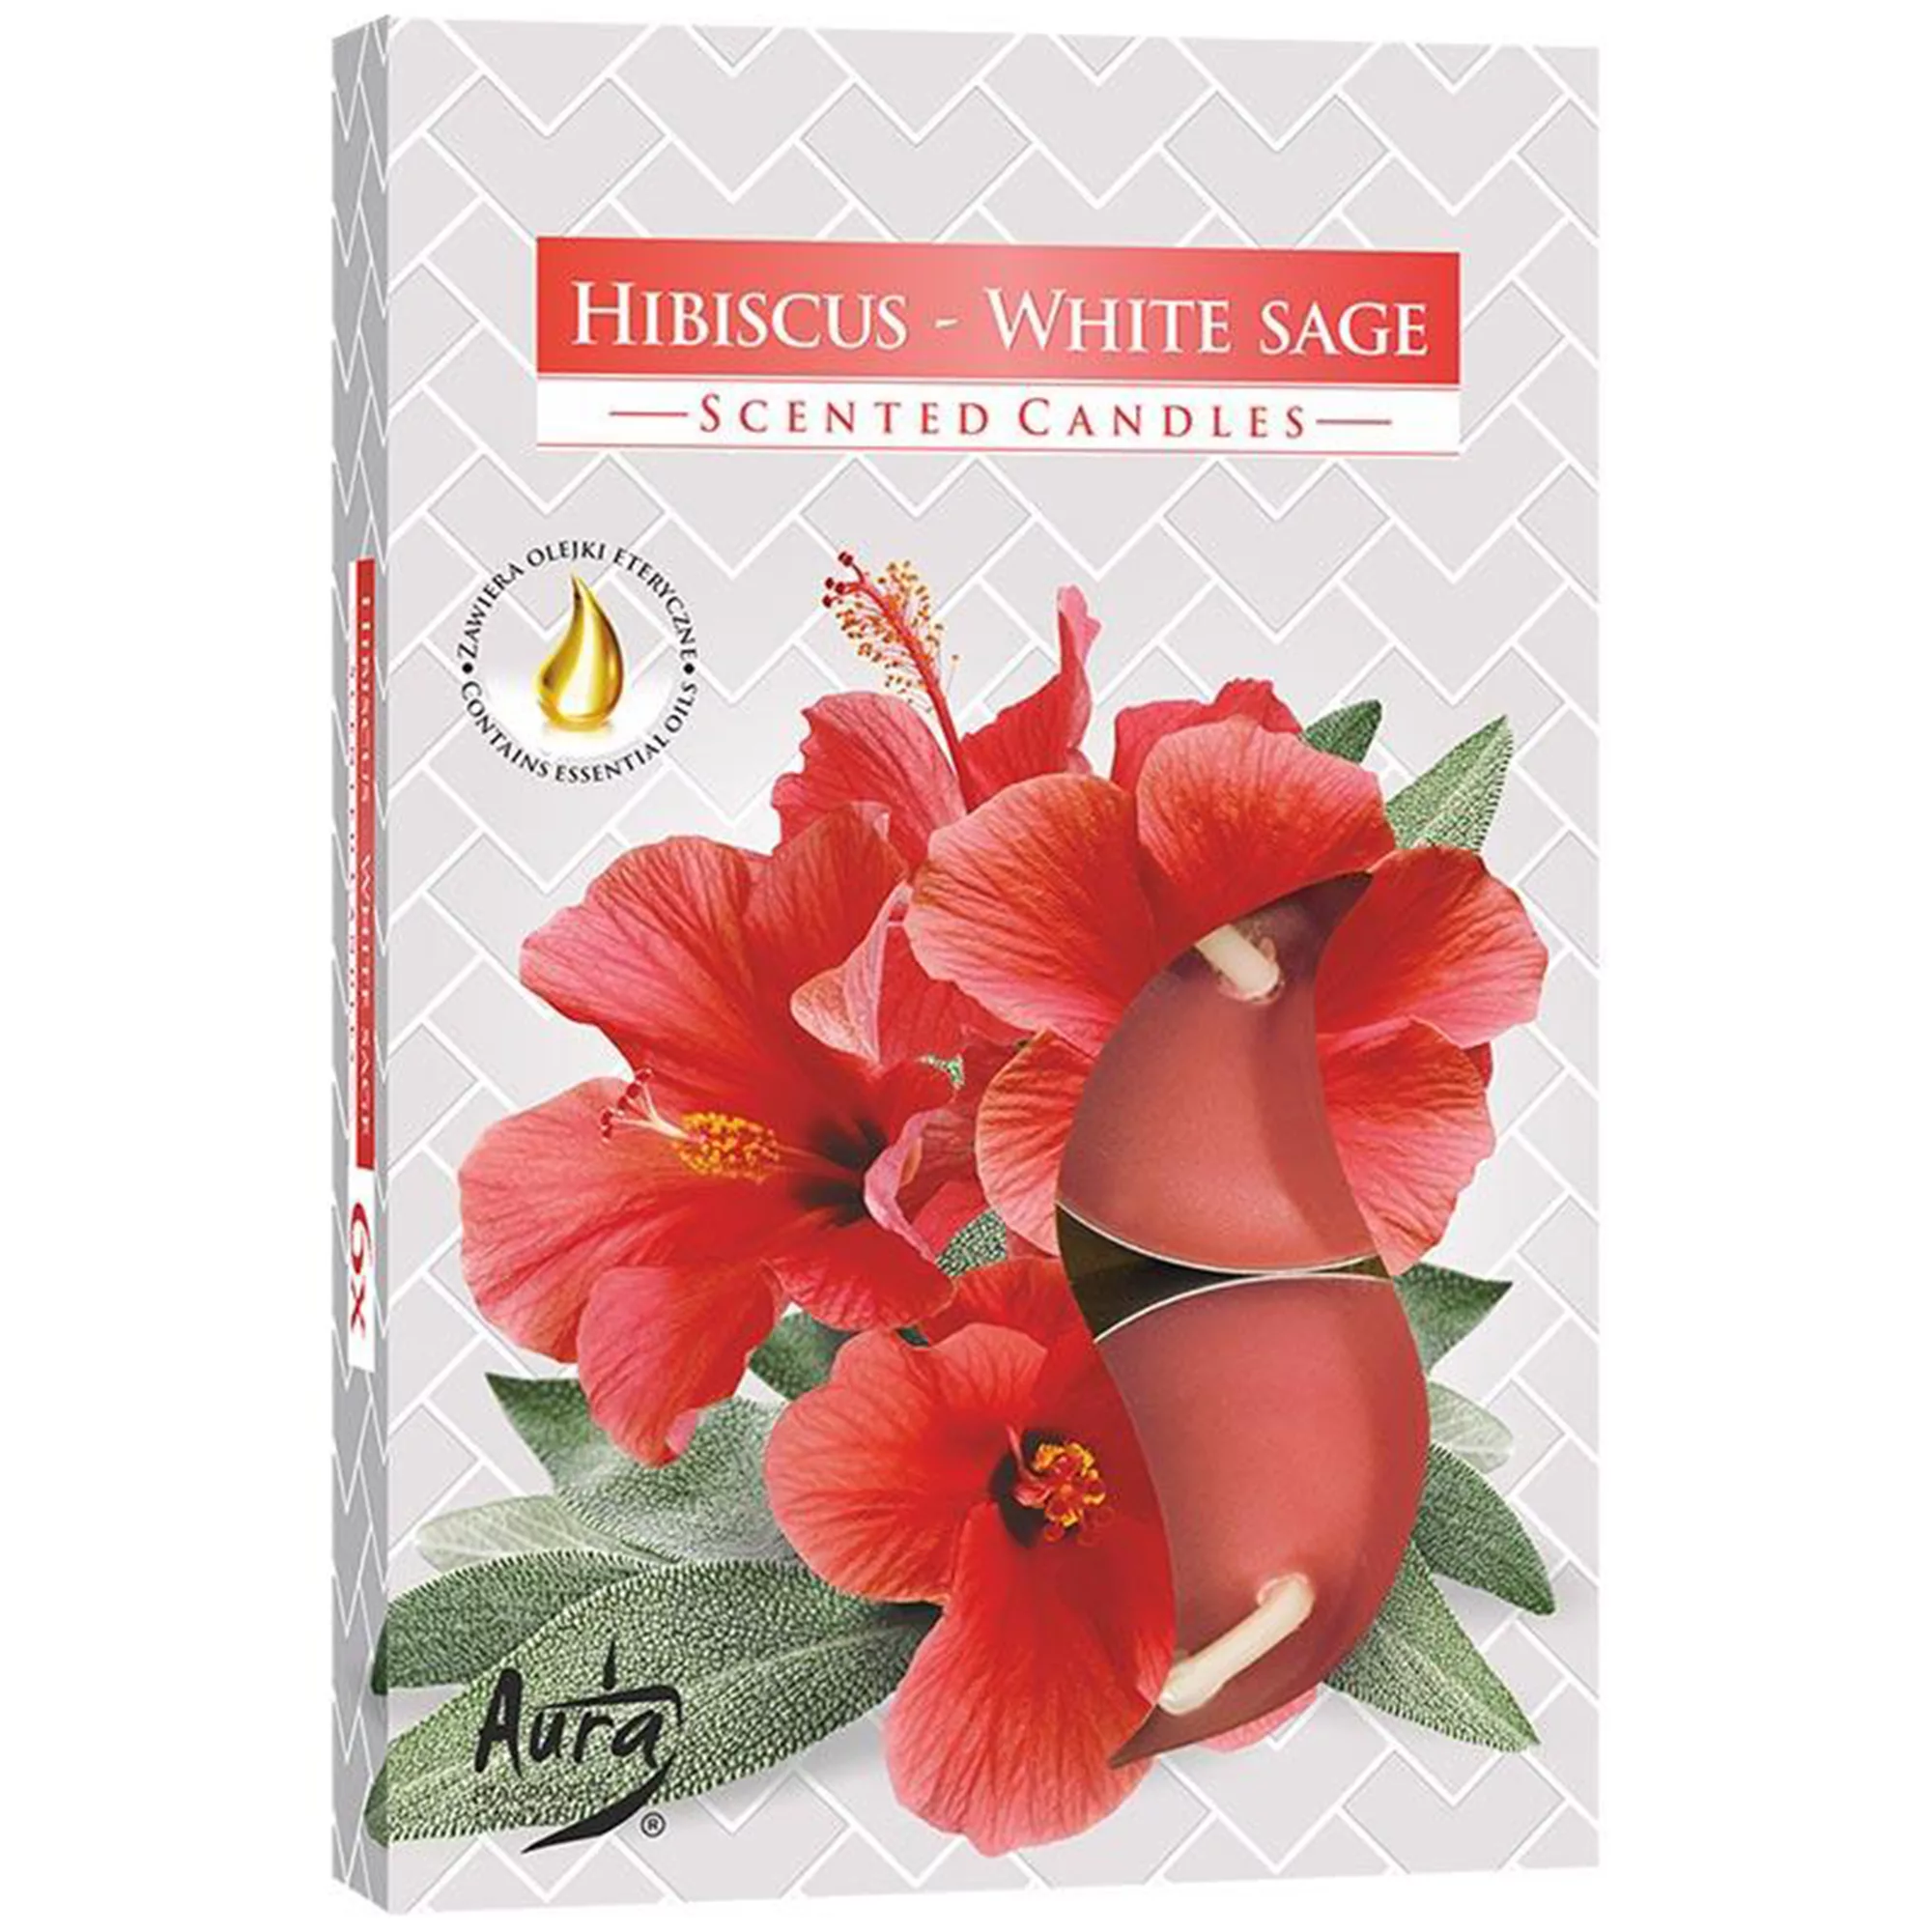 Set of 6 Scented Tealights – Hibiscus & White Sage